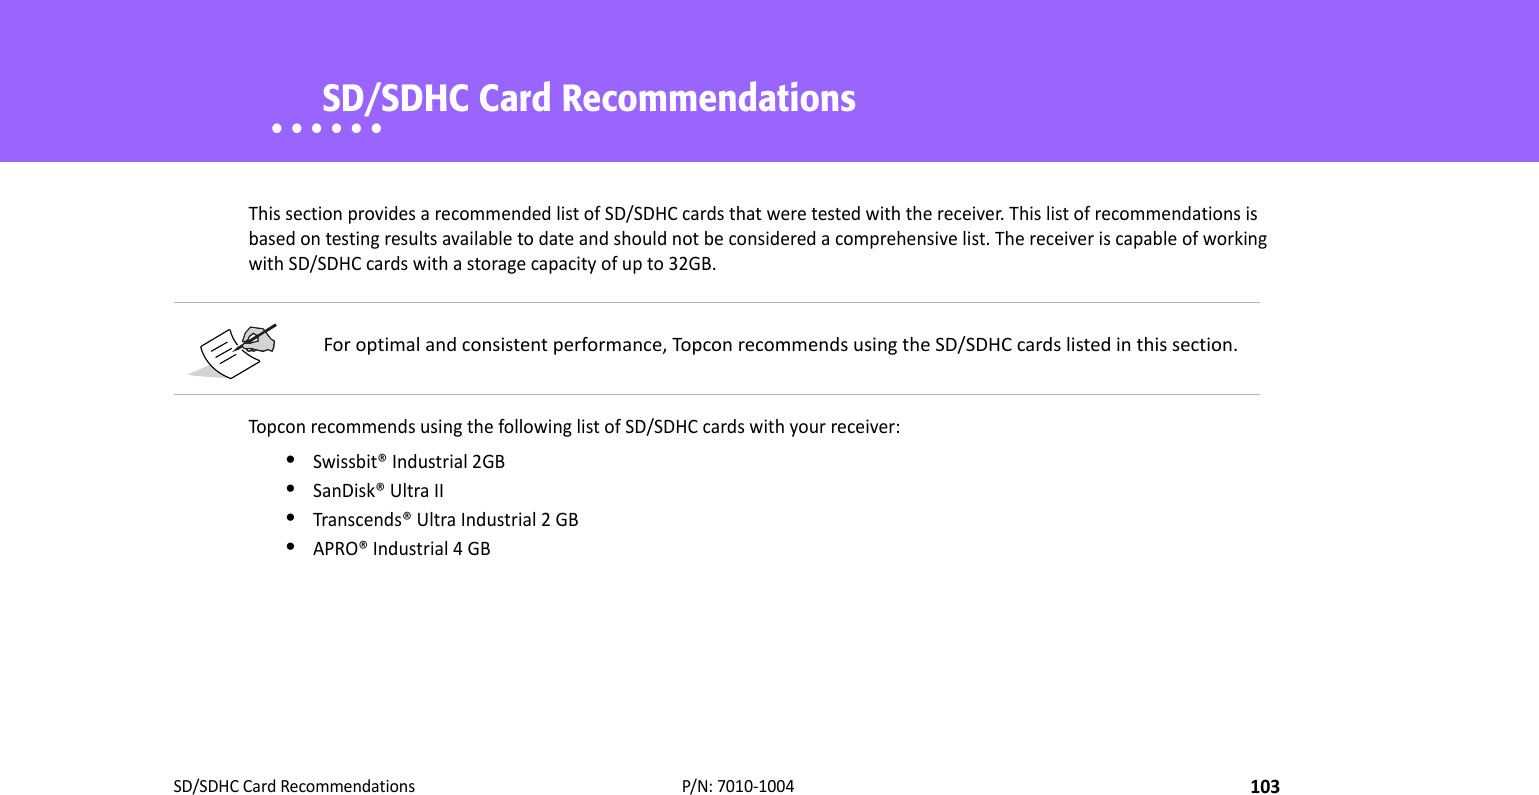 SD/SDHCCardRecommendations103P/N:7010‐1004• • • • • •    SD/SDHC Card RecommendationsThissectionprovidesarecommendedlistofSD/SDHCcardsthatweretestedwiththereceiver.Thislistofrecommendationsisbasedontestingresultsavailabletodateandshouldnotbeconsideredacomprehensivelist.ThereceiveriscapableofworkingwithSD/SDHCcardswithastoragecapacityofupto32GB.TopconrecommendsusingthefollowinglistofSD/SDHCcardswithyourreceiver:•Swissbit®Industrial2GB•SanDisk®UltraII•Transcends®UltraIndustrial2GB•APRO®Industrial4GBForoptimalandconsistentperformance,TopconrecommendsusingtheSD/SDHCcardslistedinthissection.